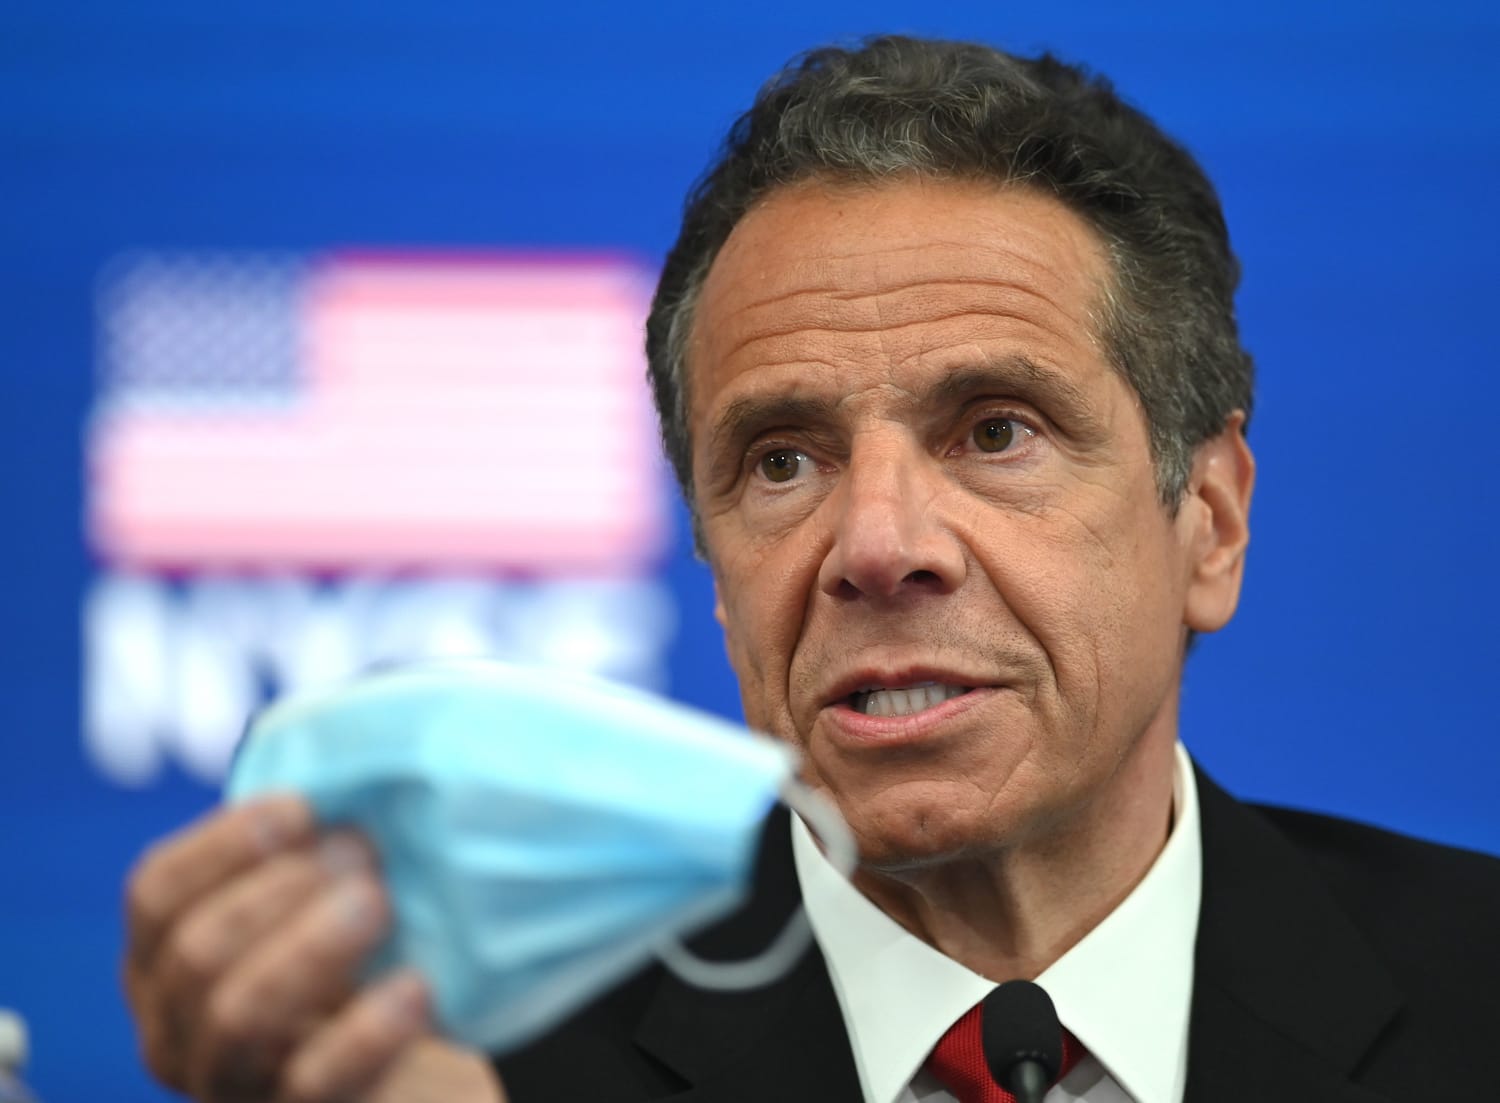 NY Gov. Andrew Cuomo says he will meet with Trump Wednesday to discuss coronavirus, infrastructure plans